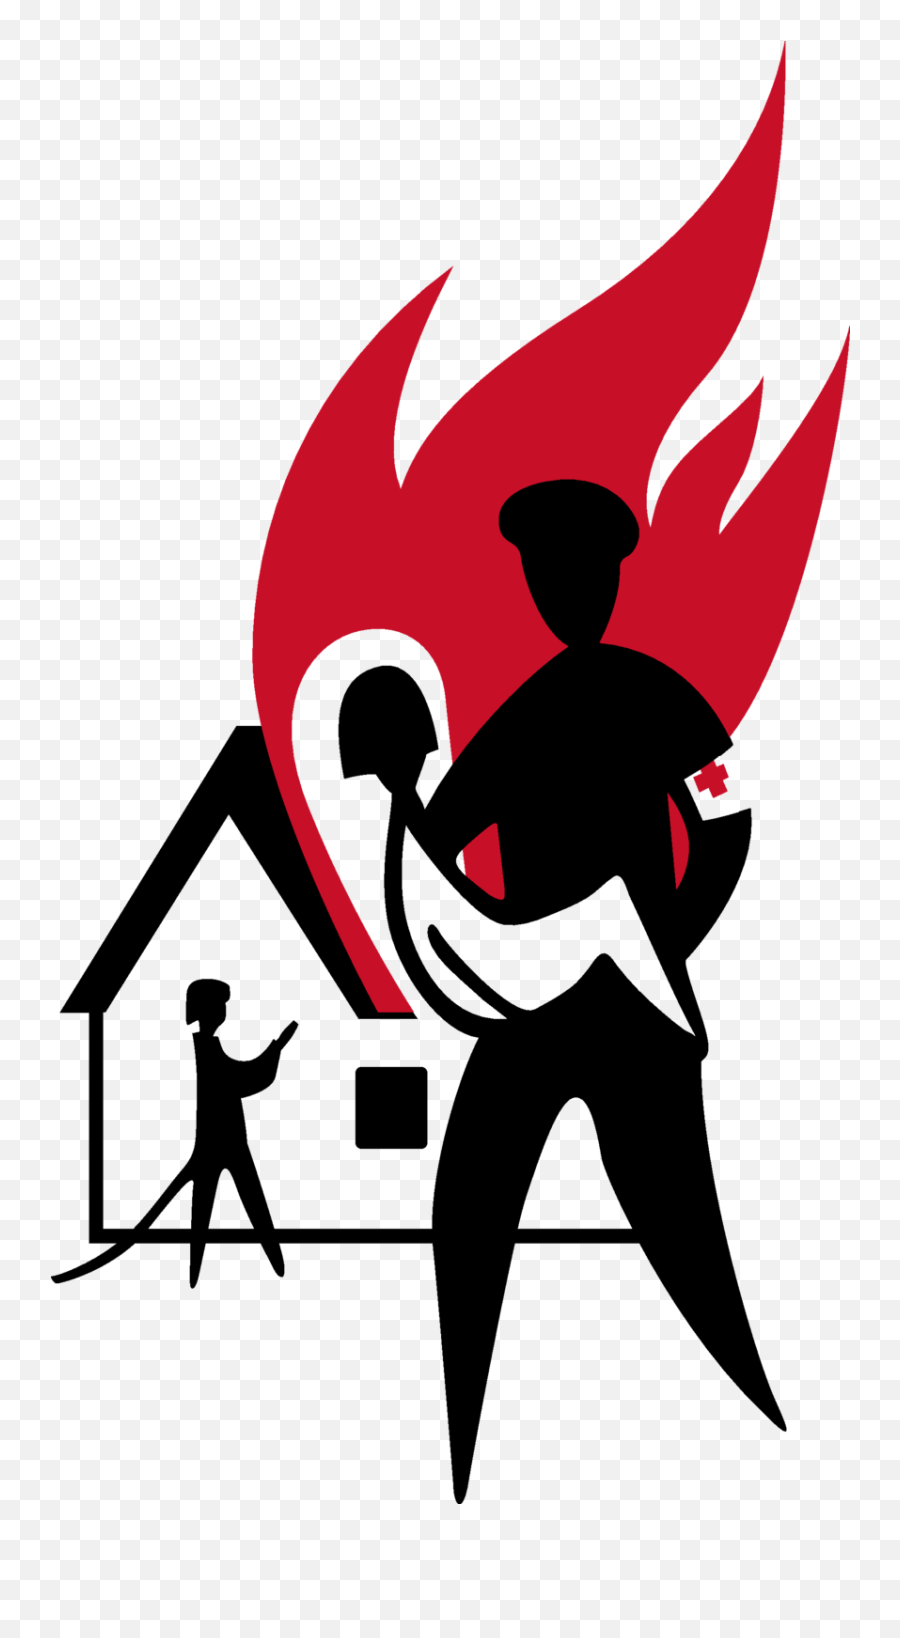 Art Silhouette - Firefighter Png Download 8501557 Free Firefighter Png,Firefighter Png